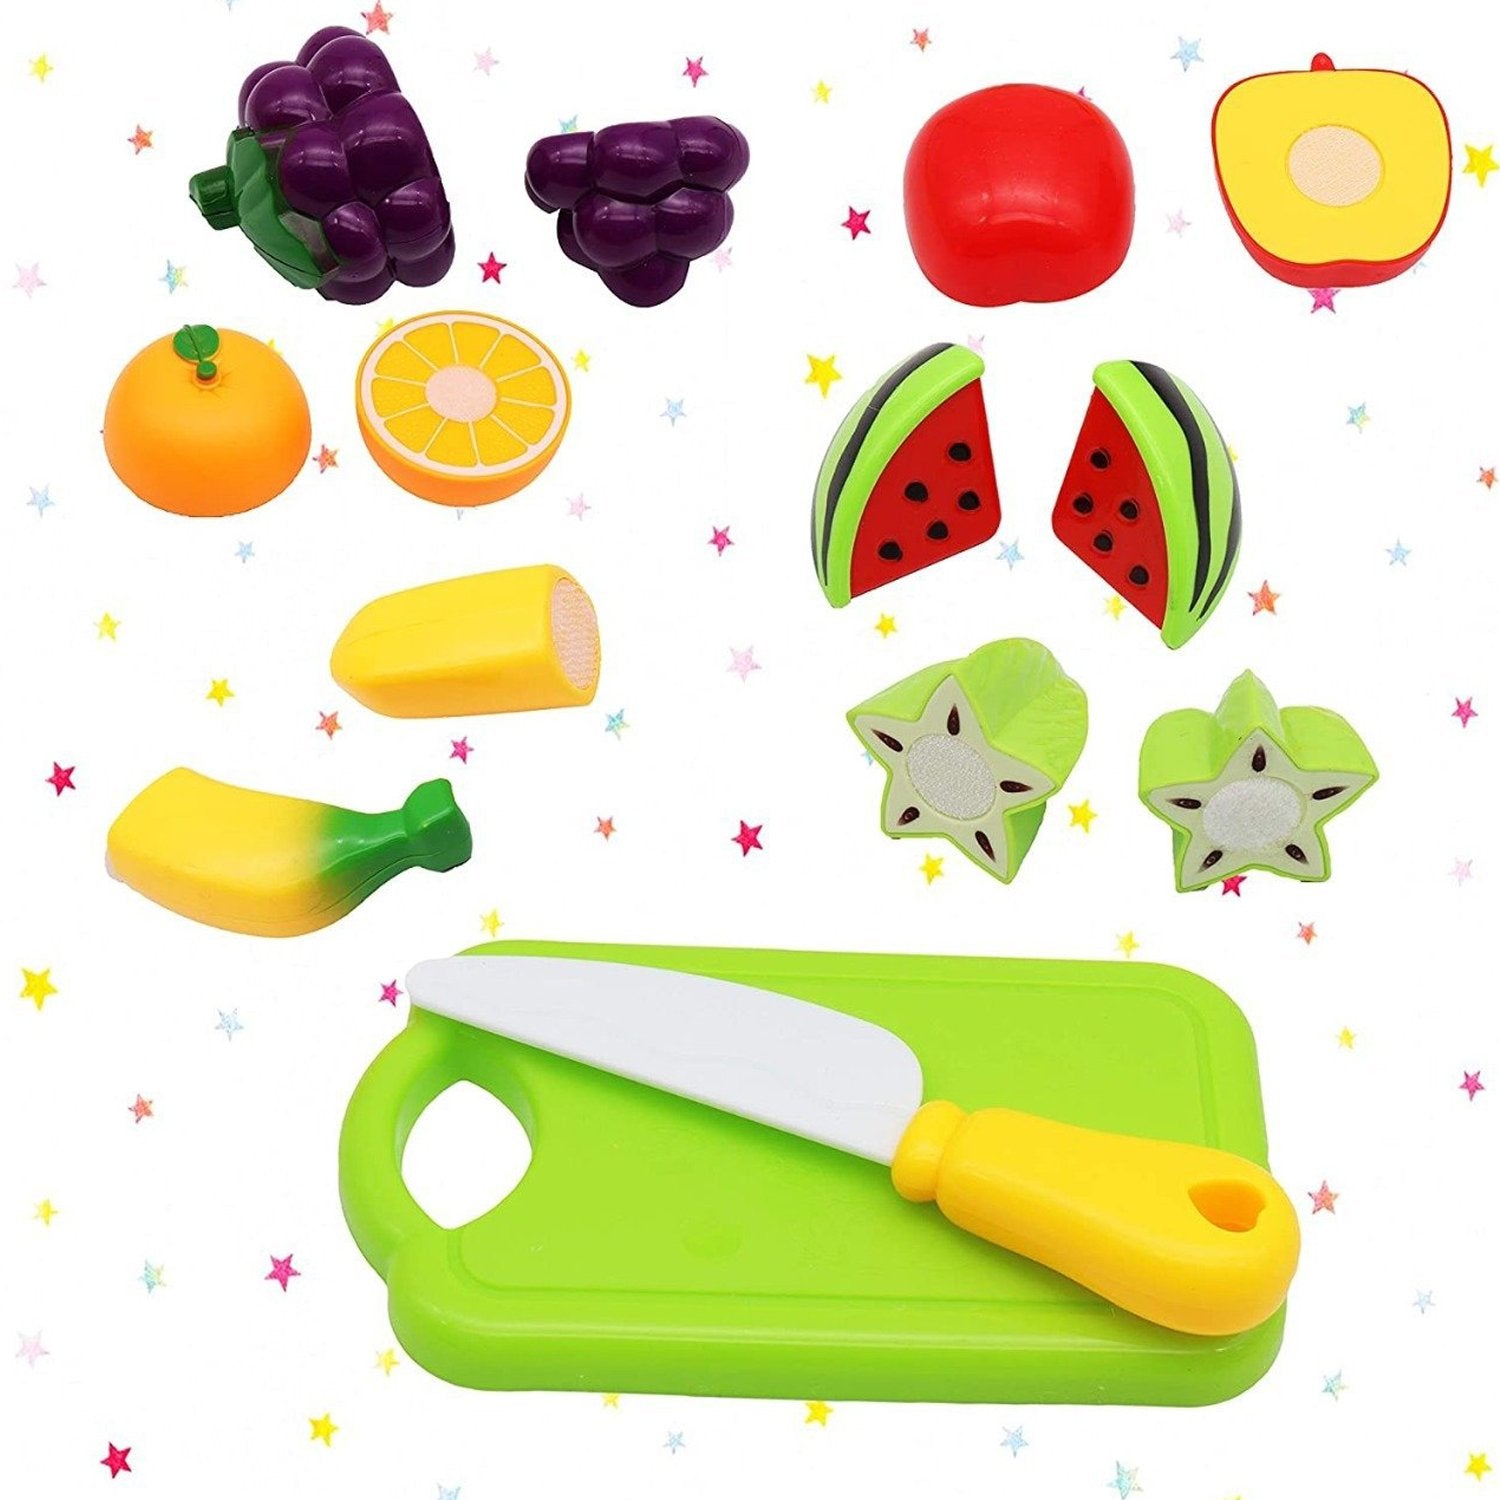 8037 Plastic Fruits N Veggies Exclusive Collection of Realistic Sliceable Fruits DeoDap